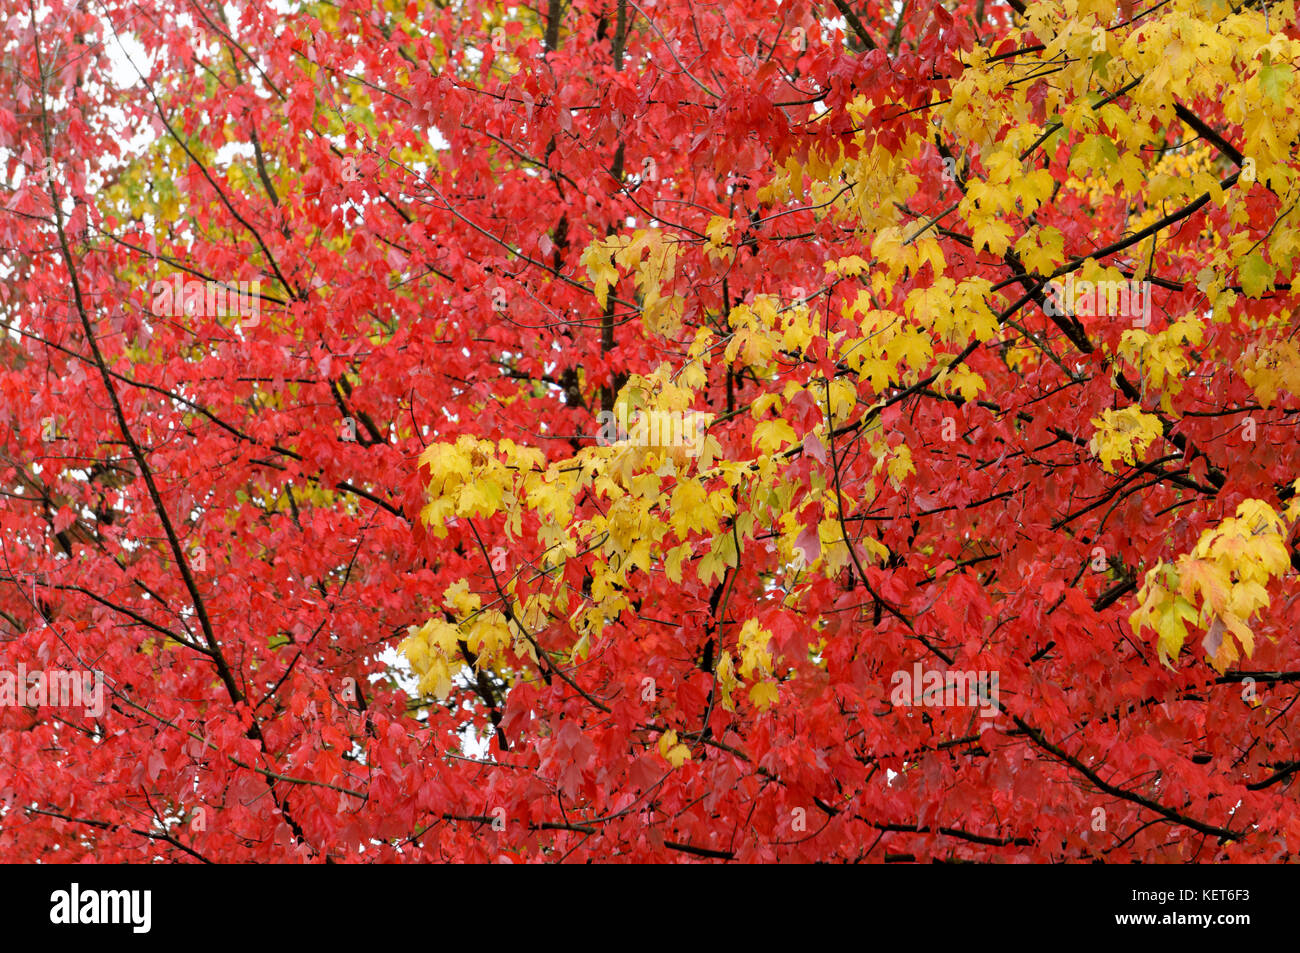 red-and-yellow-fall-foliage-of-maple-tre